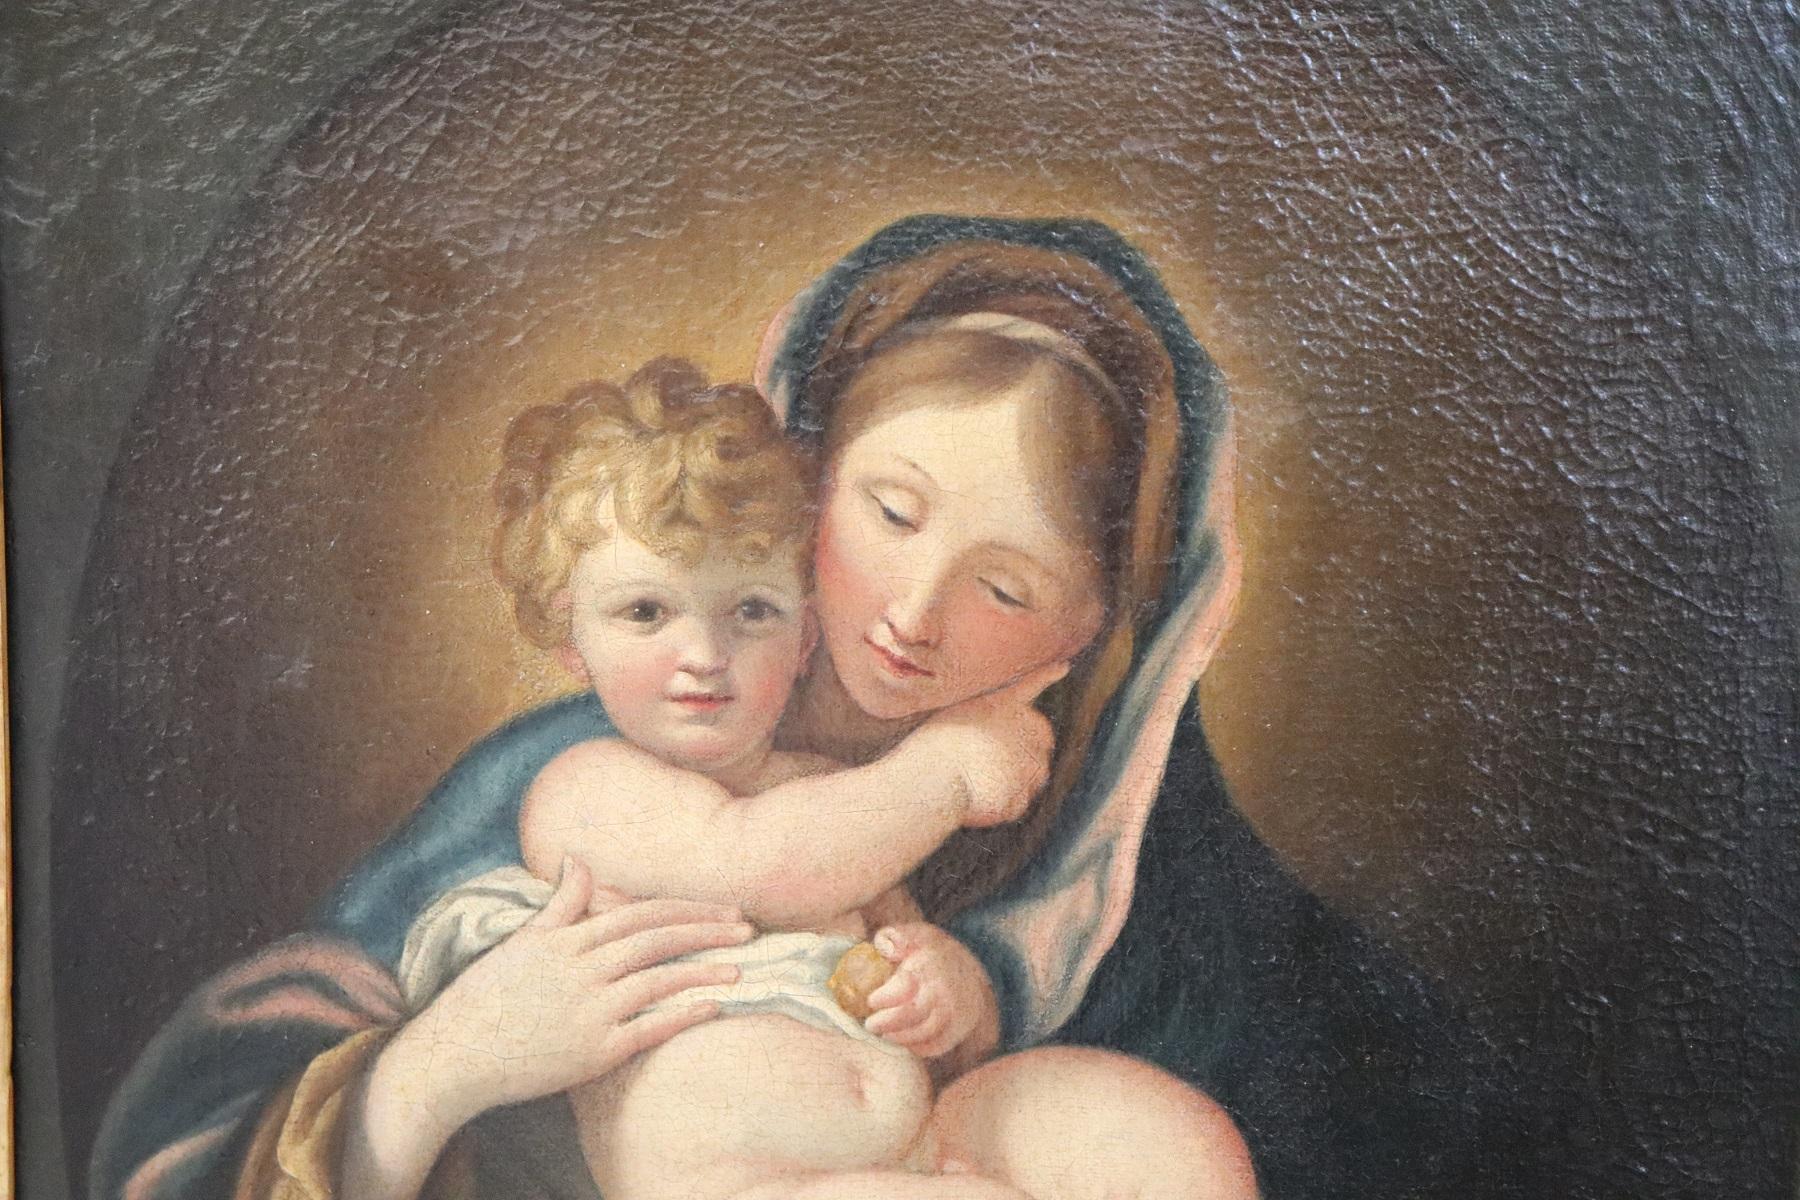 Oil painting on canvas antique high vintage dimensions with frame 68 x 80 without frame 50 x 62.50 datable around the second half of the 17th century XVII. Subject The Madonna della Melagrana with child, a work of the Piedmontese school. The